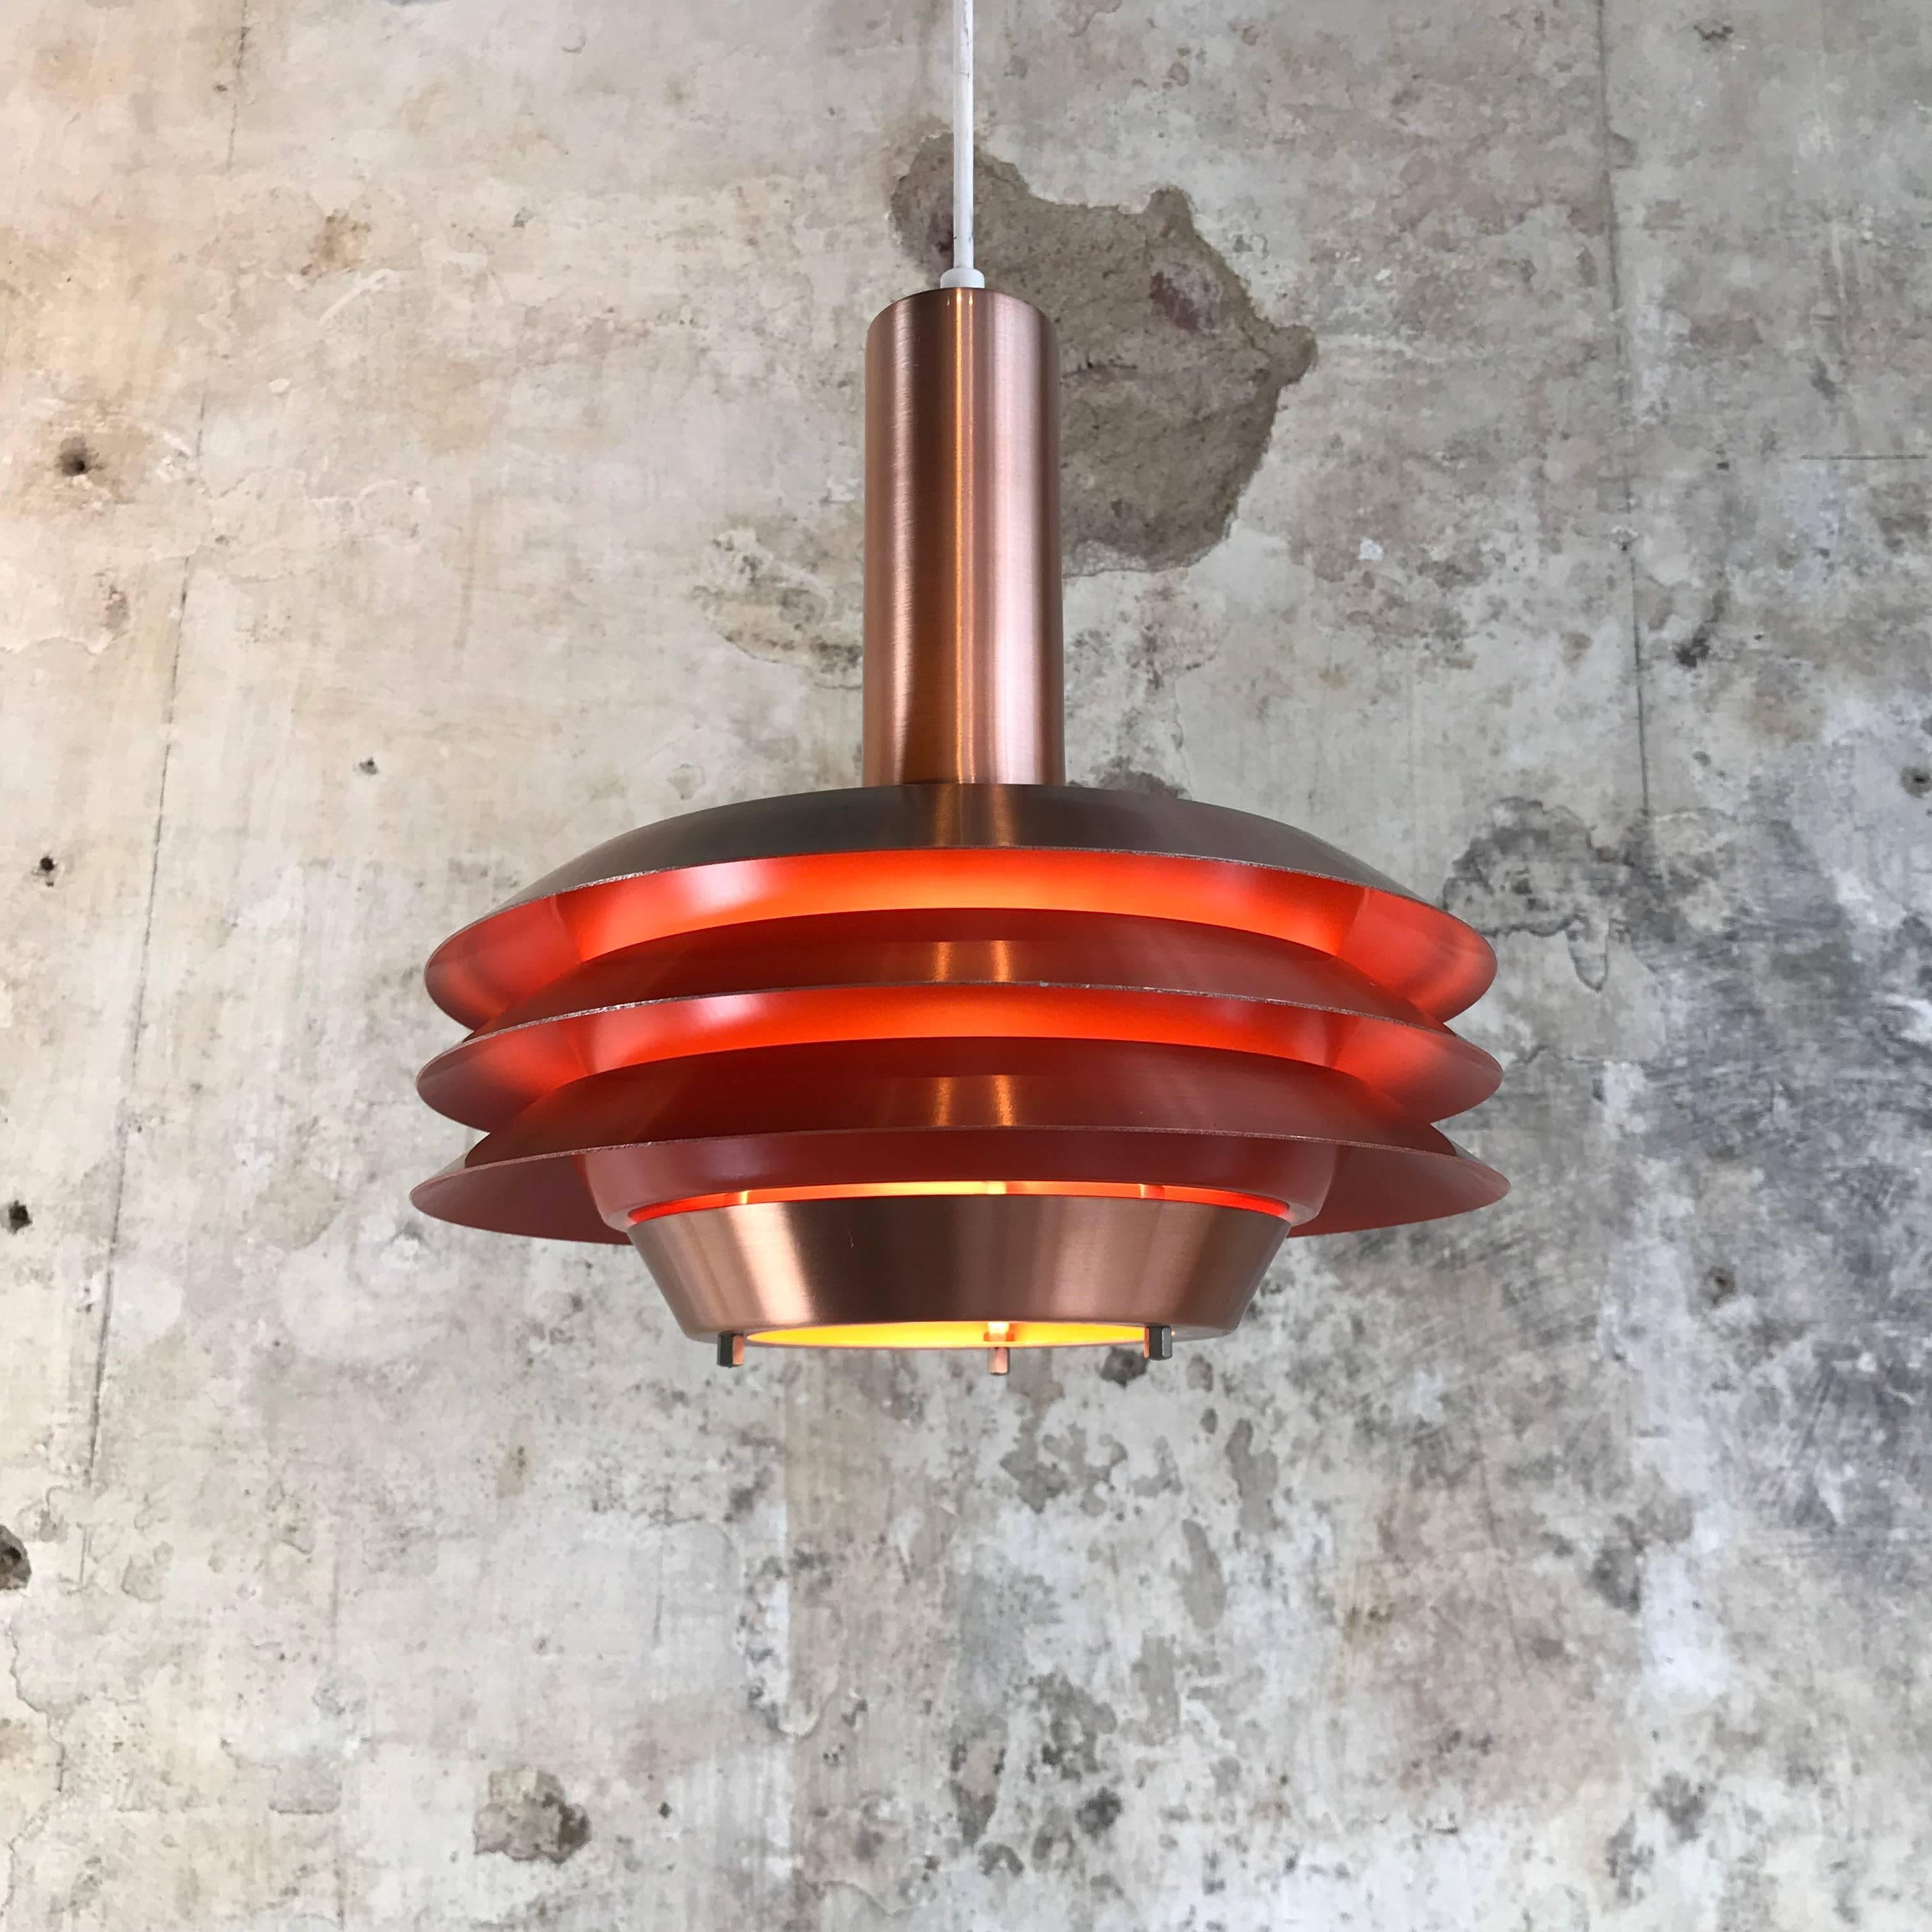 Beautiful midcentury pendant light (model no. 705) from Lyskjaer Belysning, Denmark.
Copper-plated aluminium shades, lacquered red on the inside.
Original vintage condition, some signs of age. New electrics.

Measures: H 30 cm, H 11.81 inch
Dm